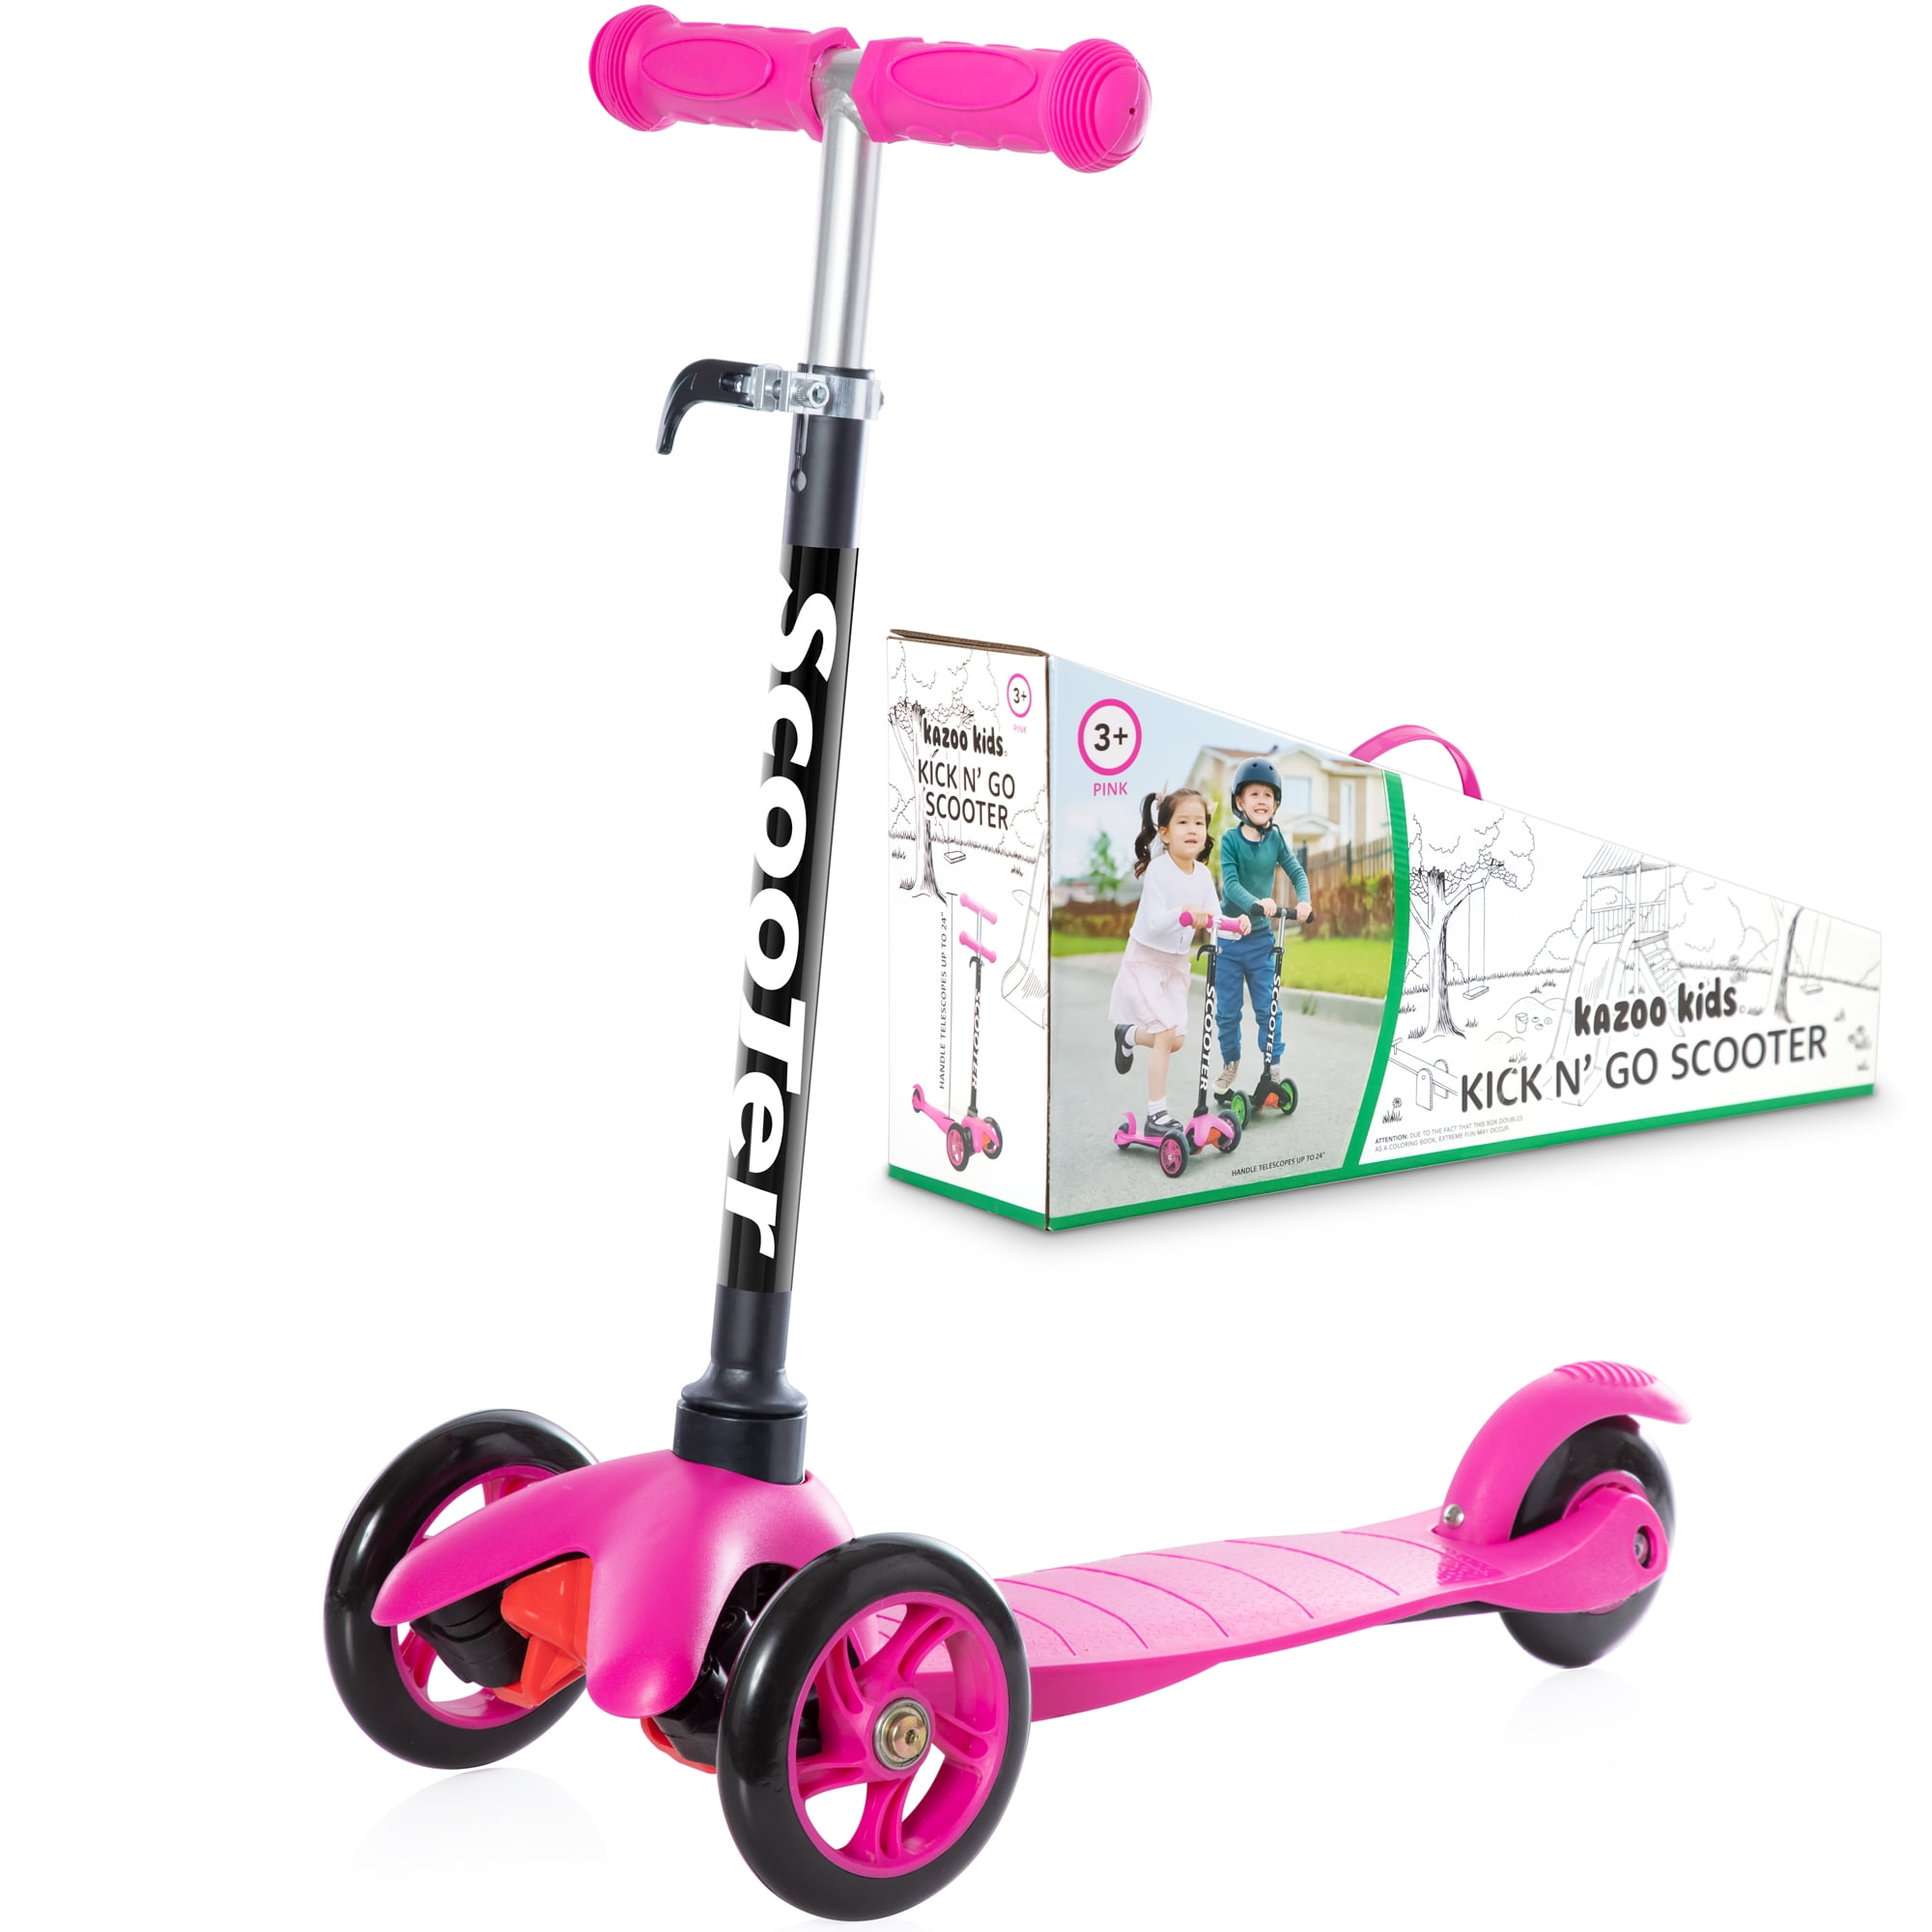 Liverpool Boys & Girls Big Wheel Scooter Gift Arsenal Scooter 